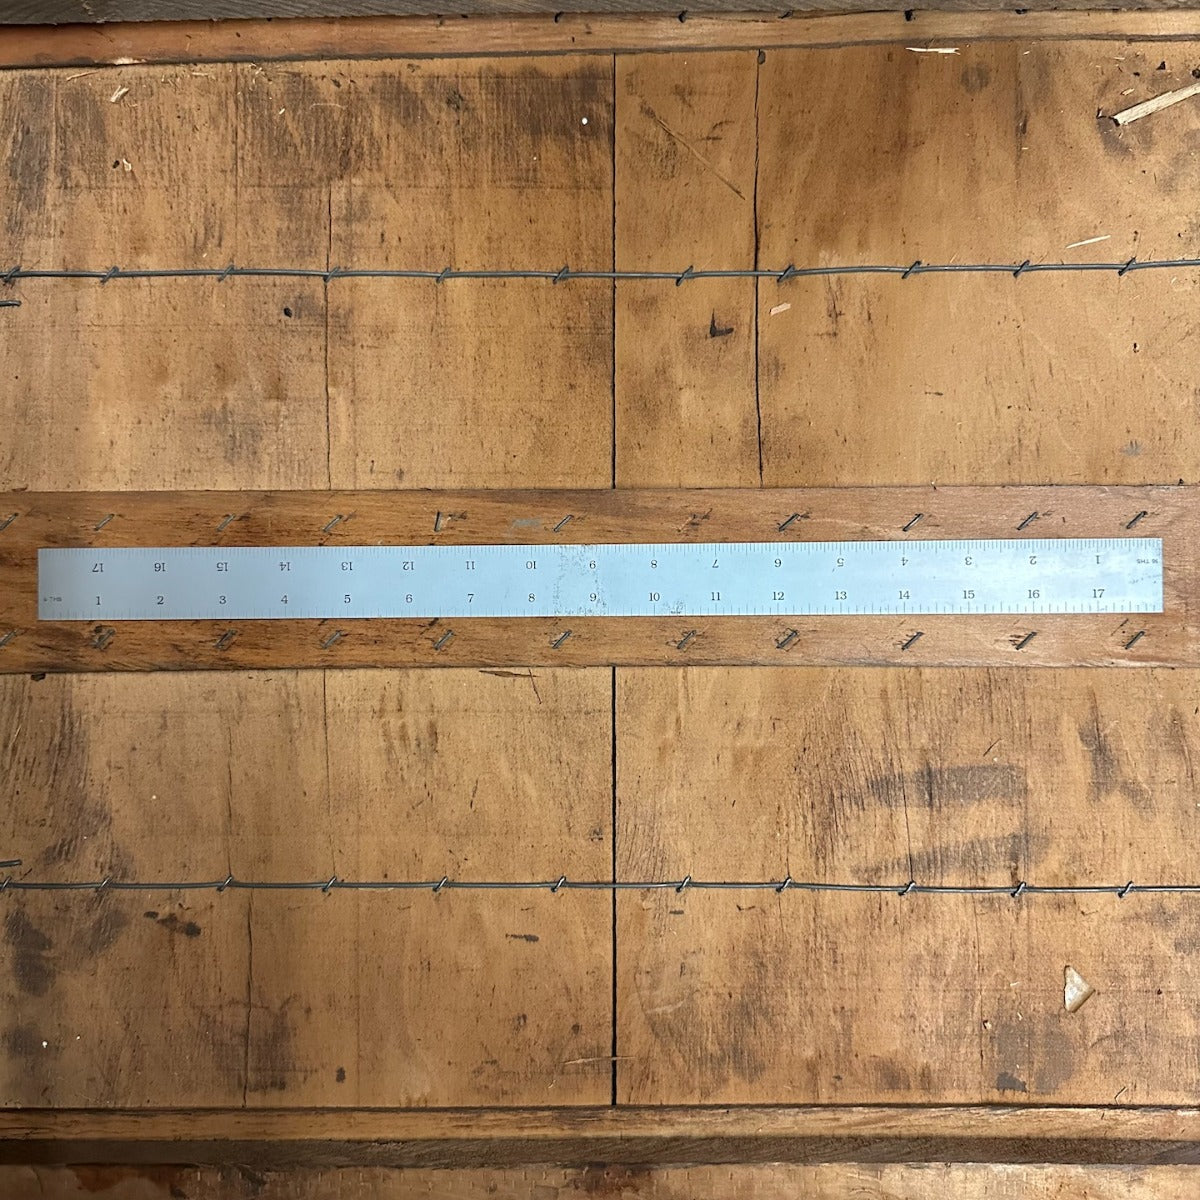 18" Products Engineering Rigid 4R Tempered 4R Ruler 8ths/16ths 32nds/64ths (780045)